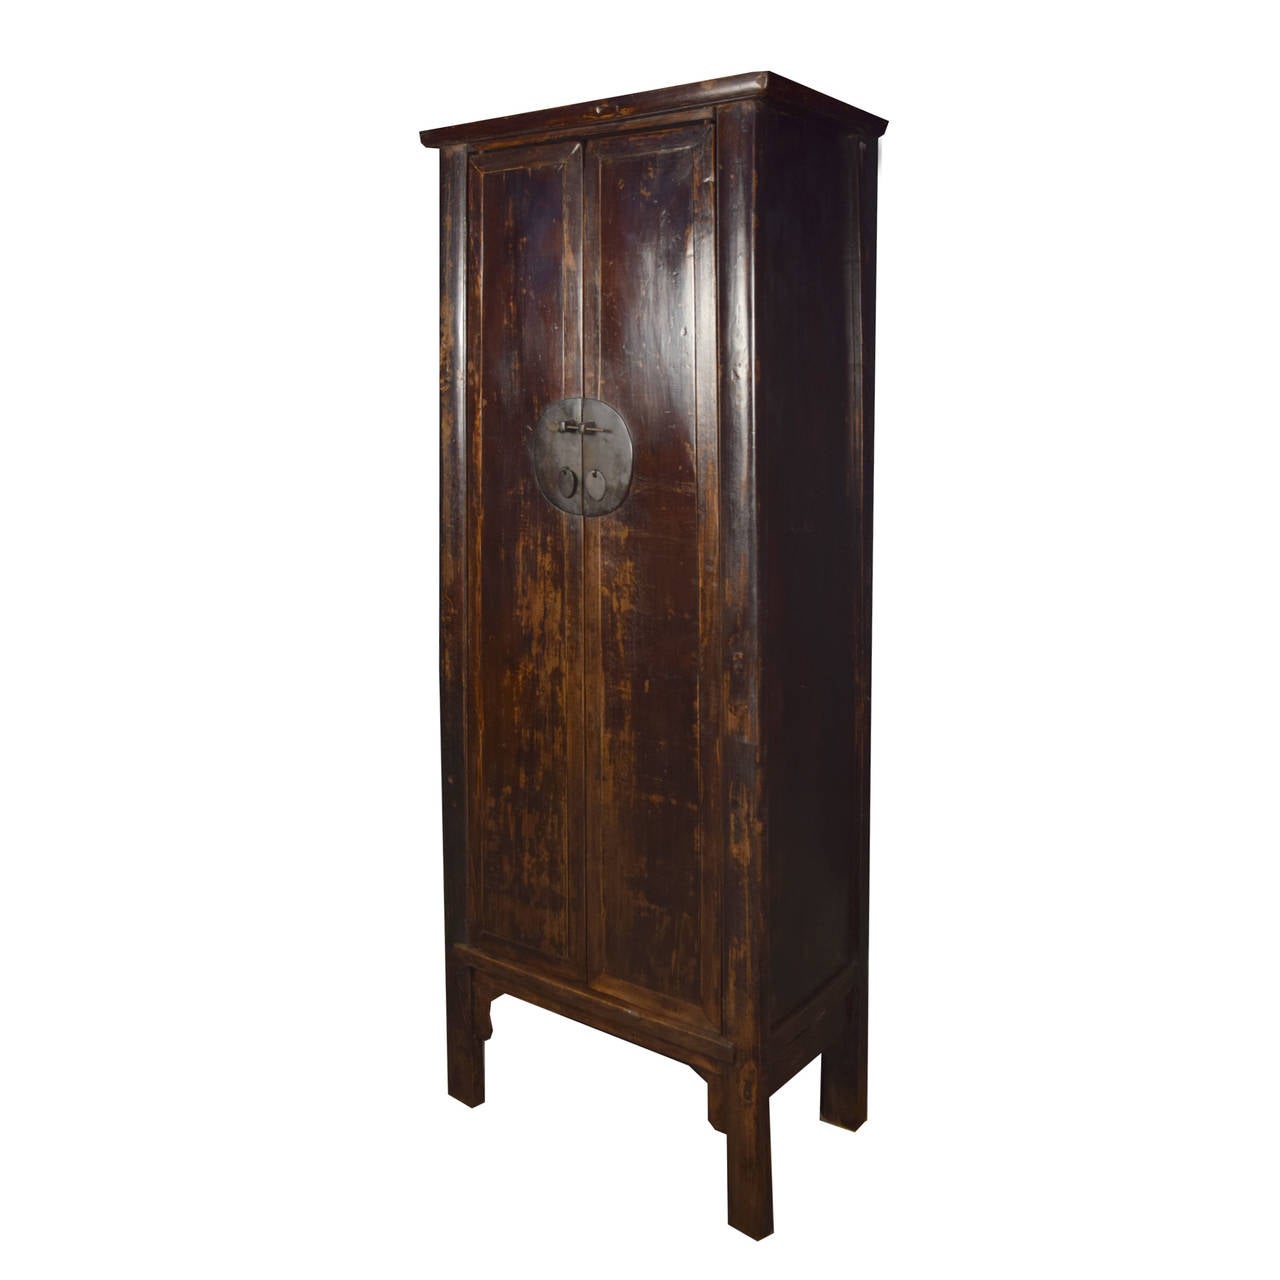 A circa 1800 tall two-door cabinet from Shanxi Province, China made of Chinese Northern Elmwood with a beautifully worn patina.

                 